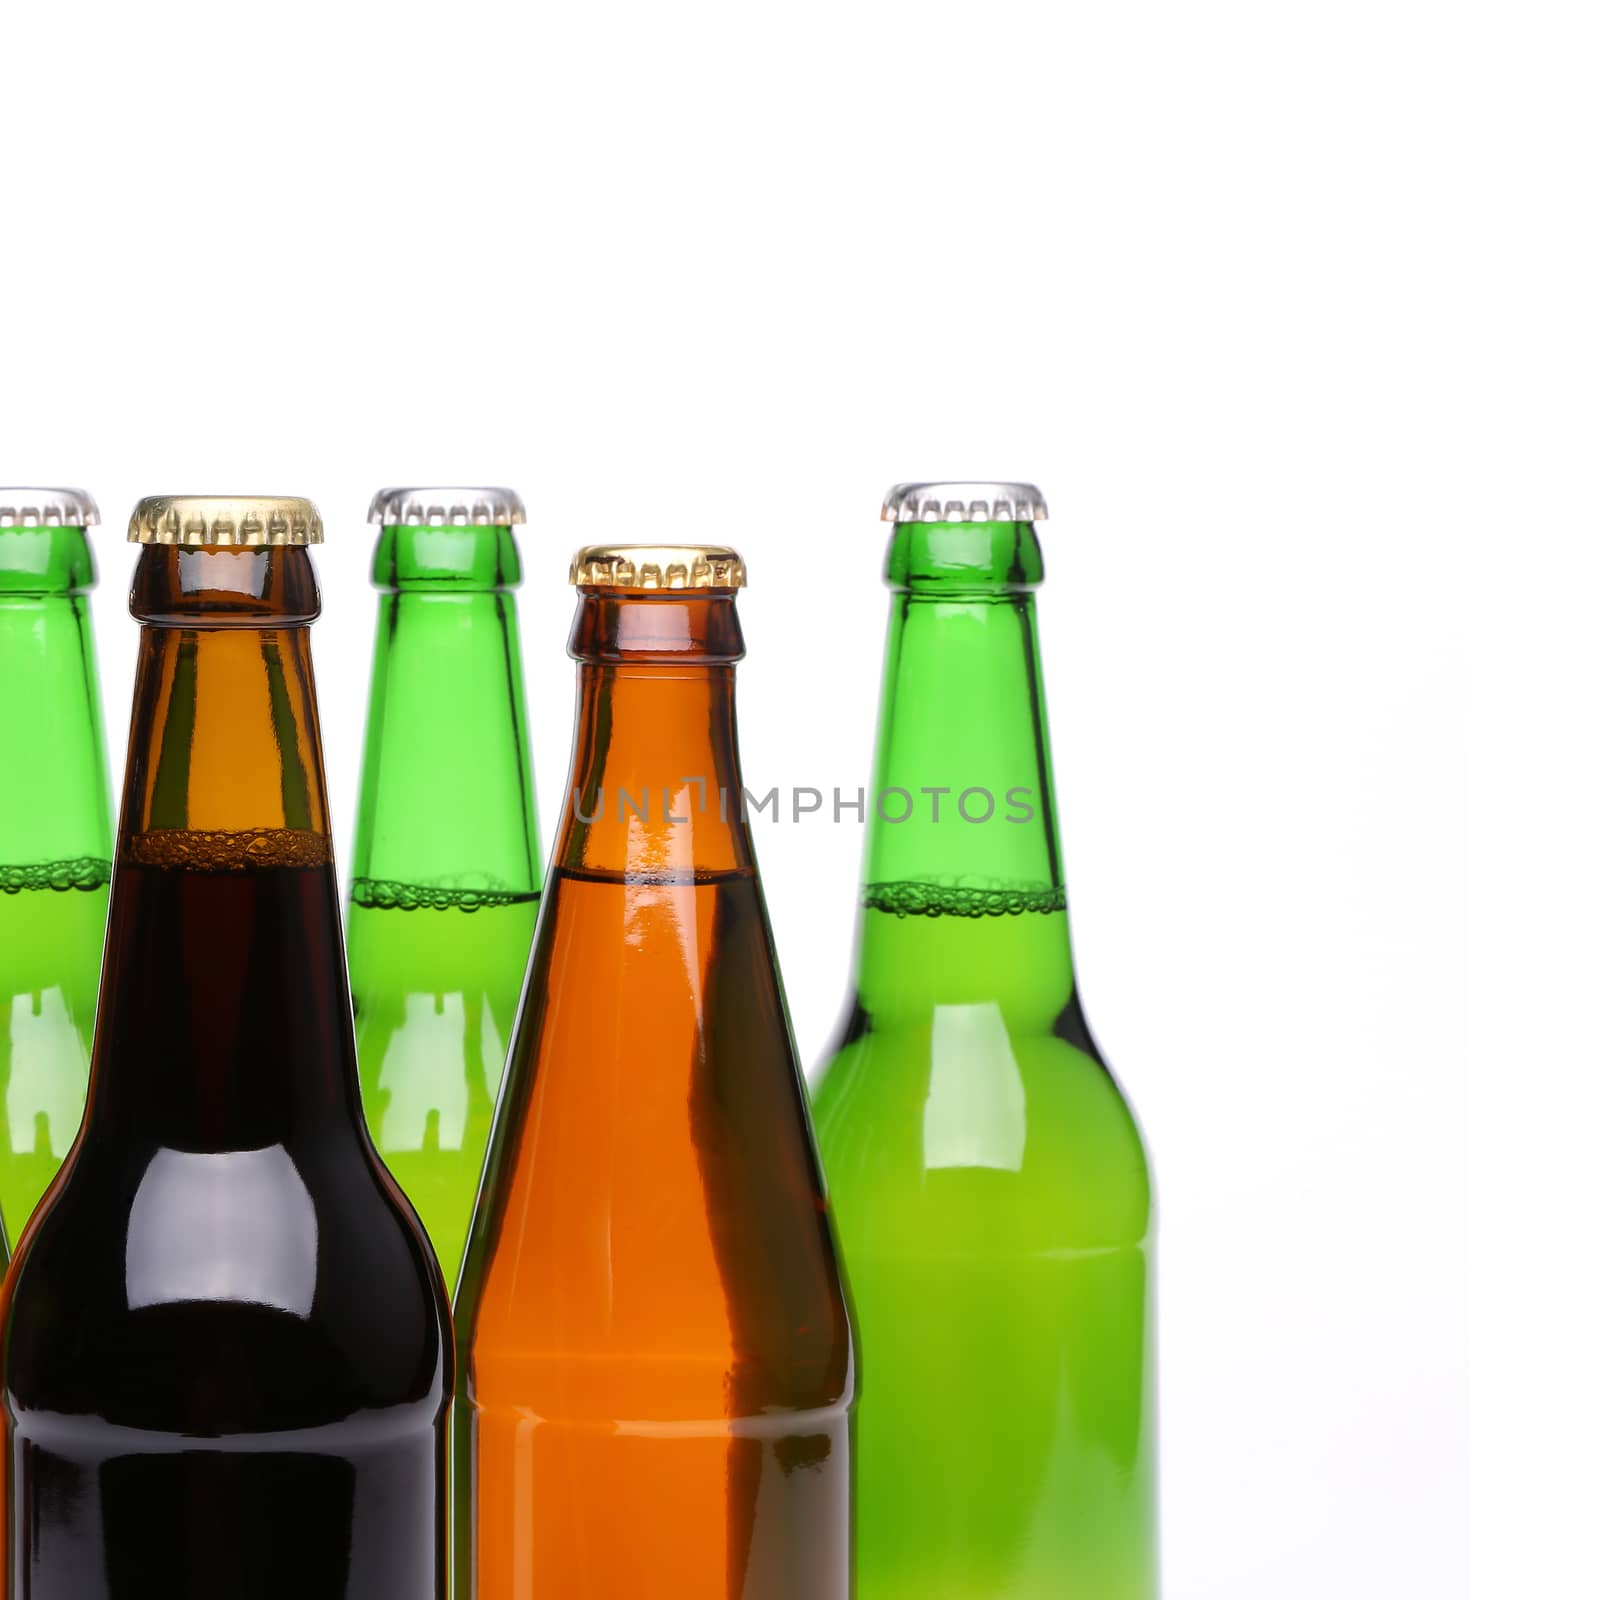 Closed bottles of beer on a white background by indigolotos